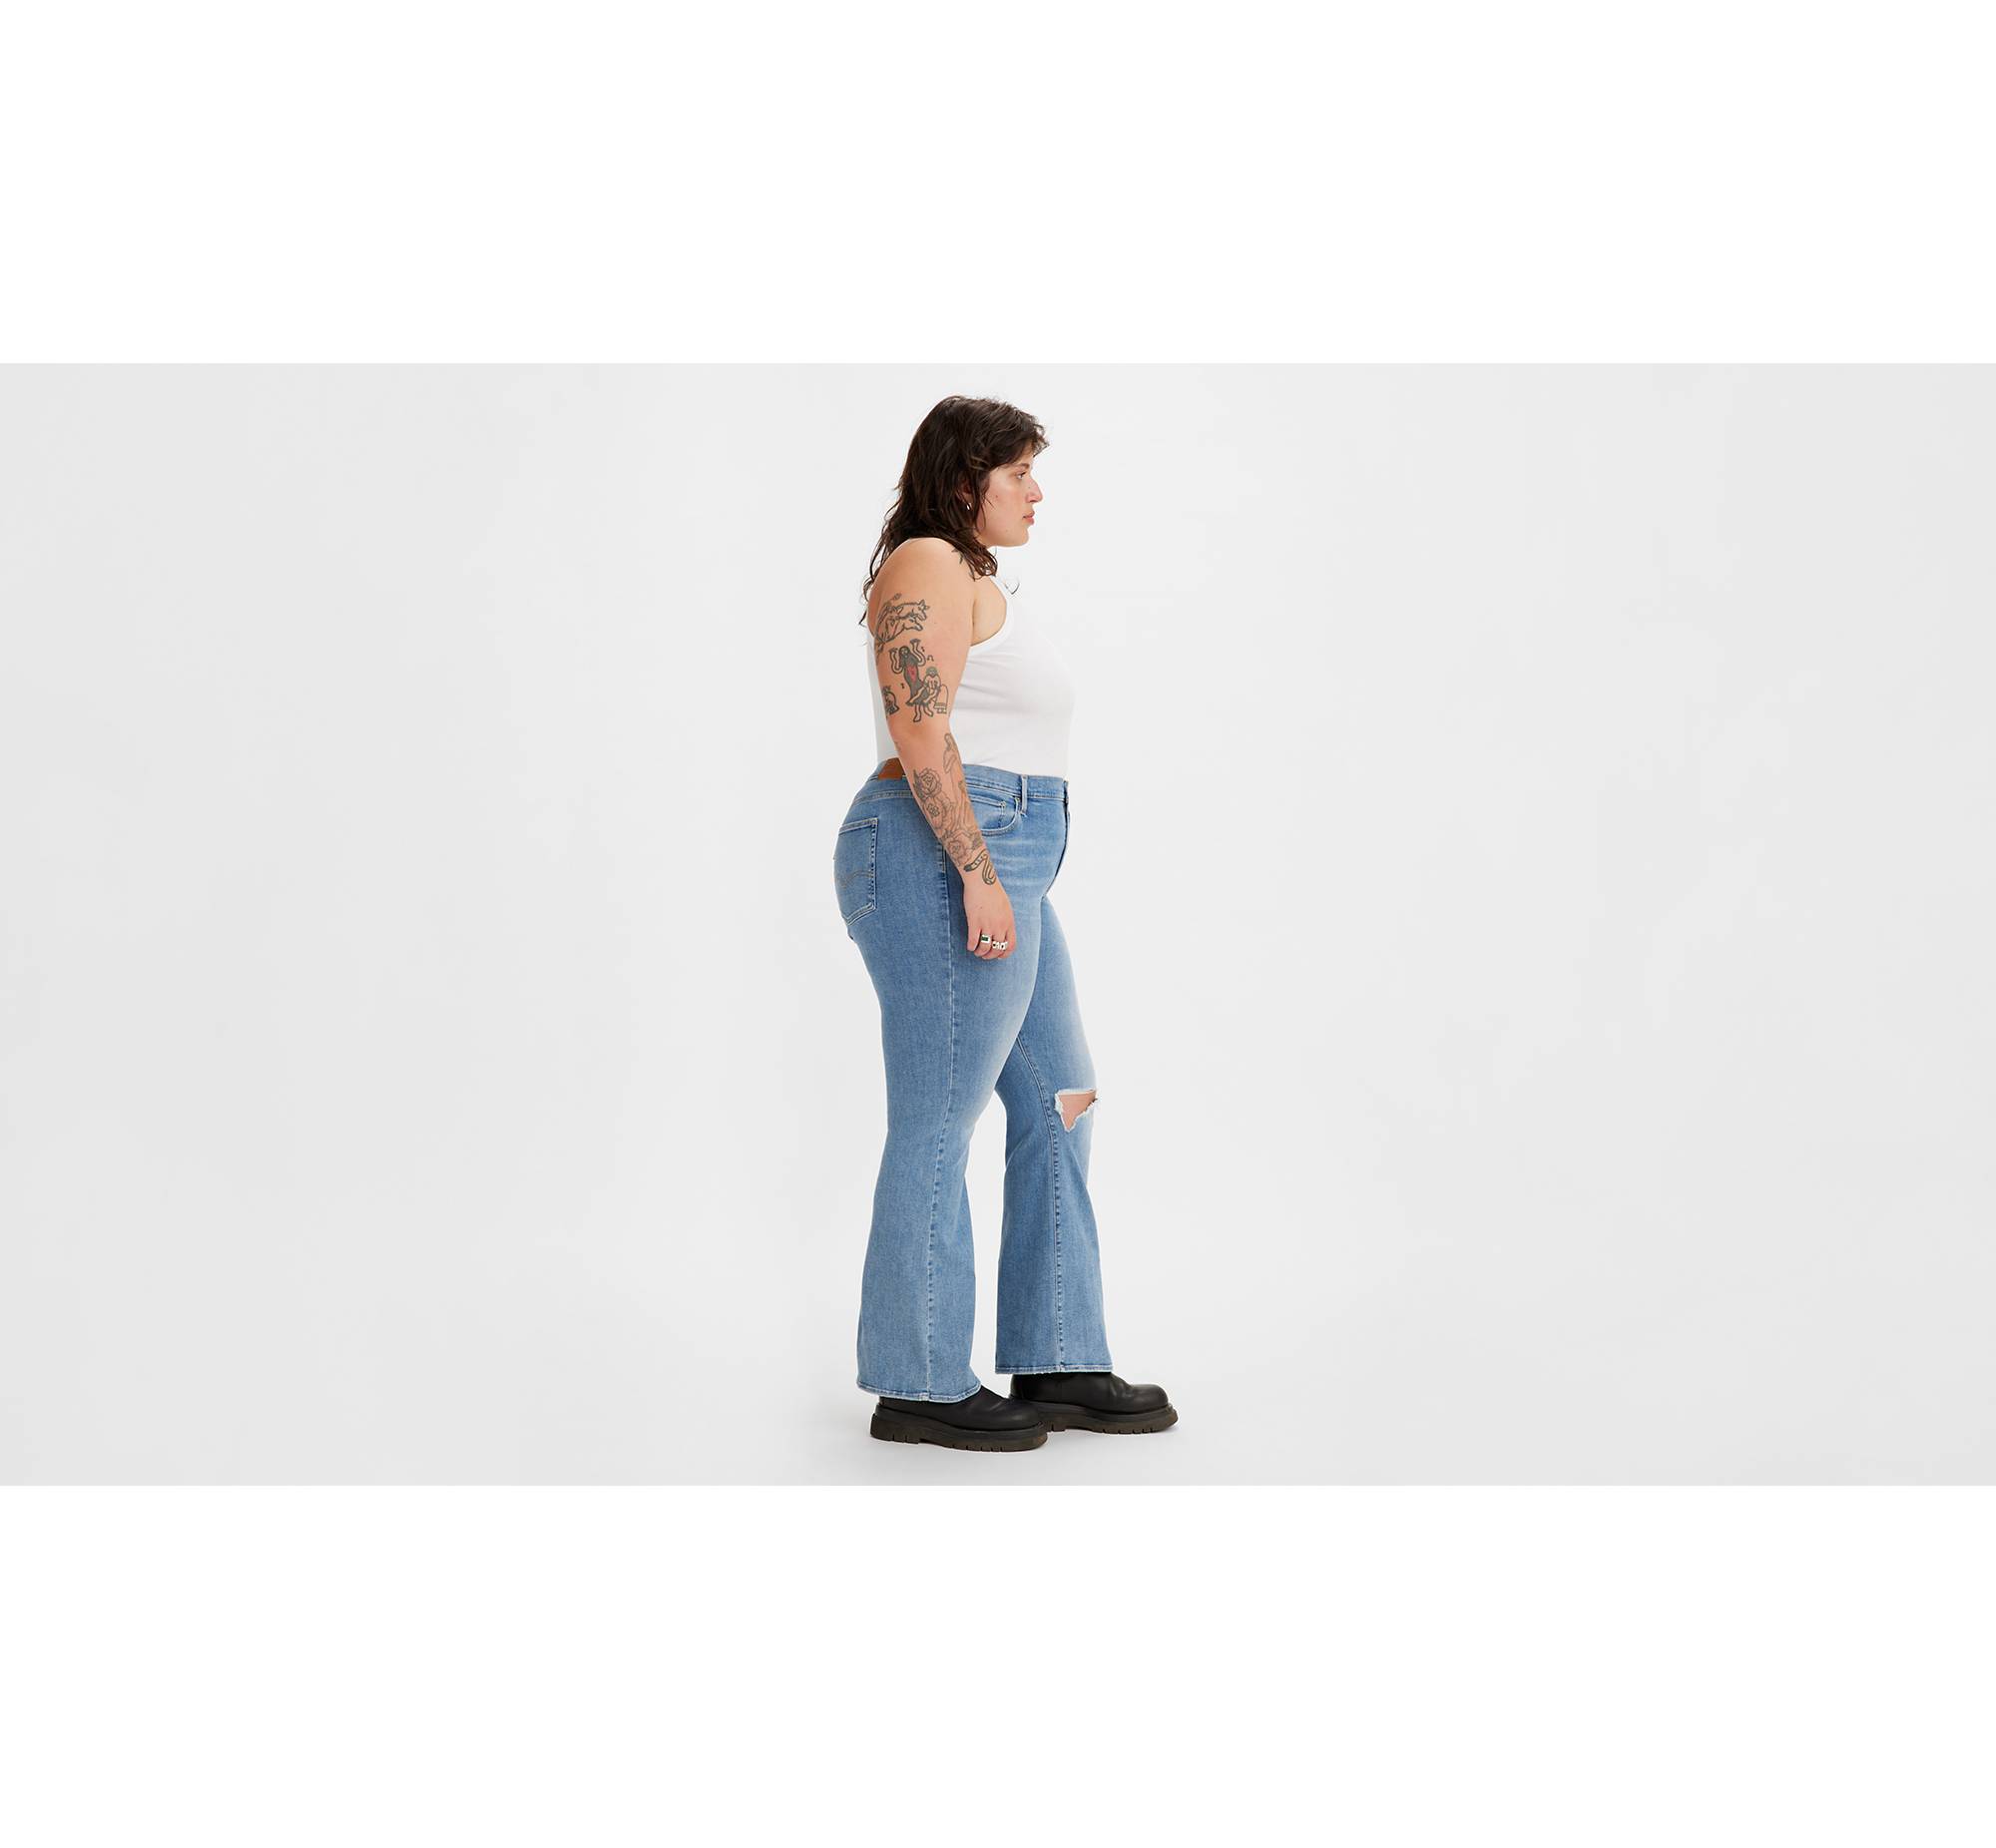 Flare Jeans for Women Bell Bottom Jeans Mid Rise Jeans Plus Size